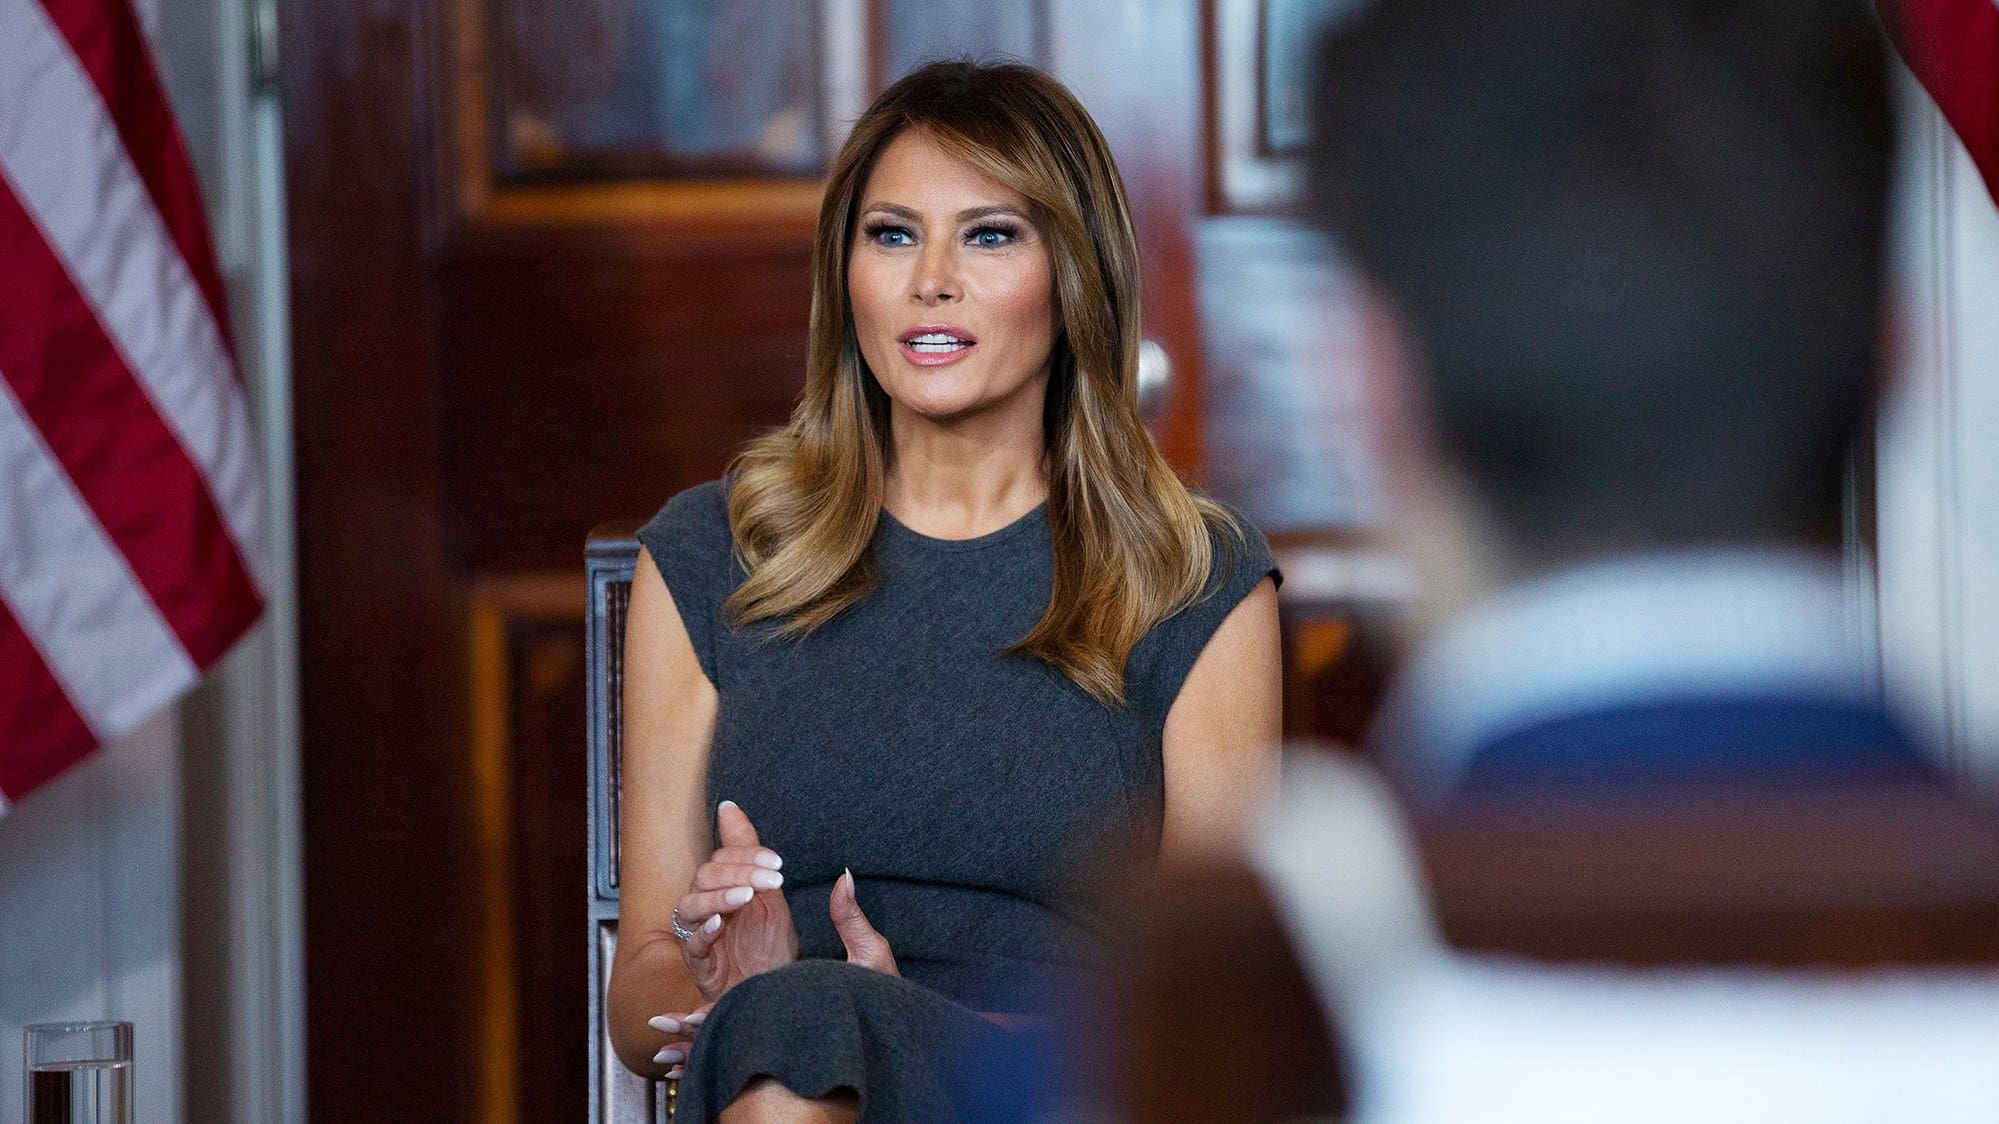 Melania Trump Gets Booed During Speech At Event In ...